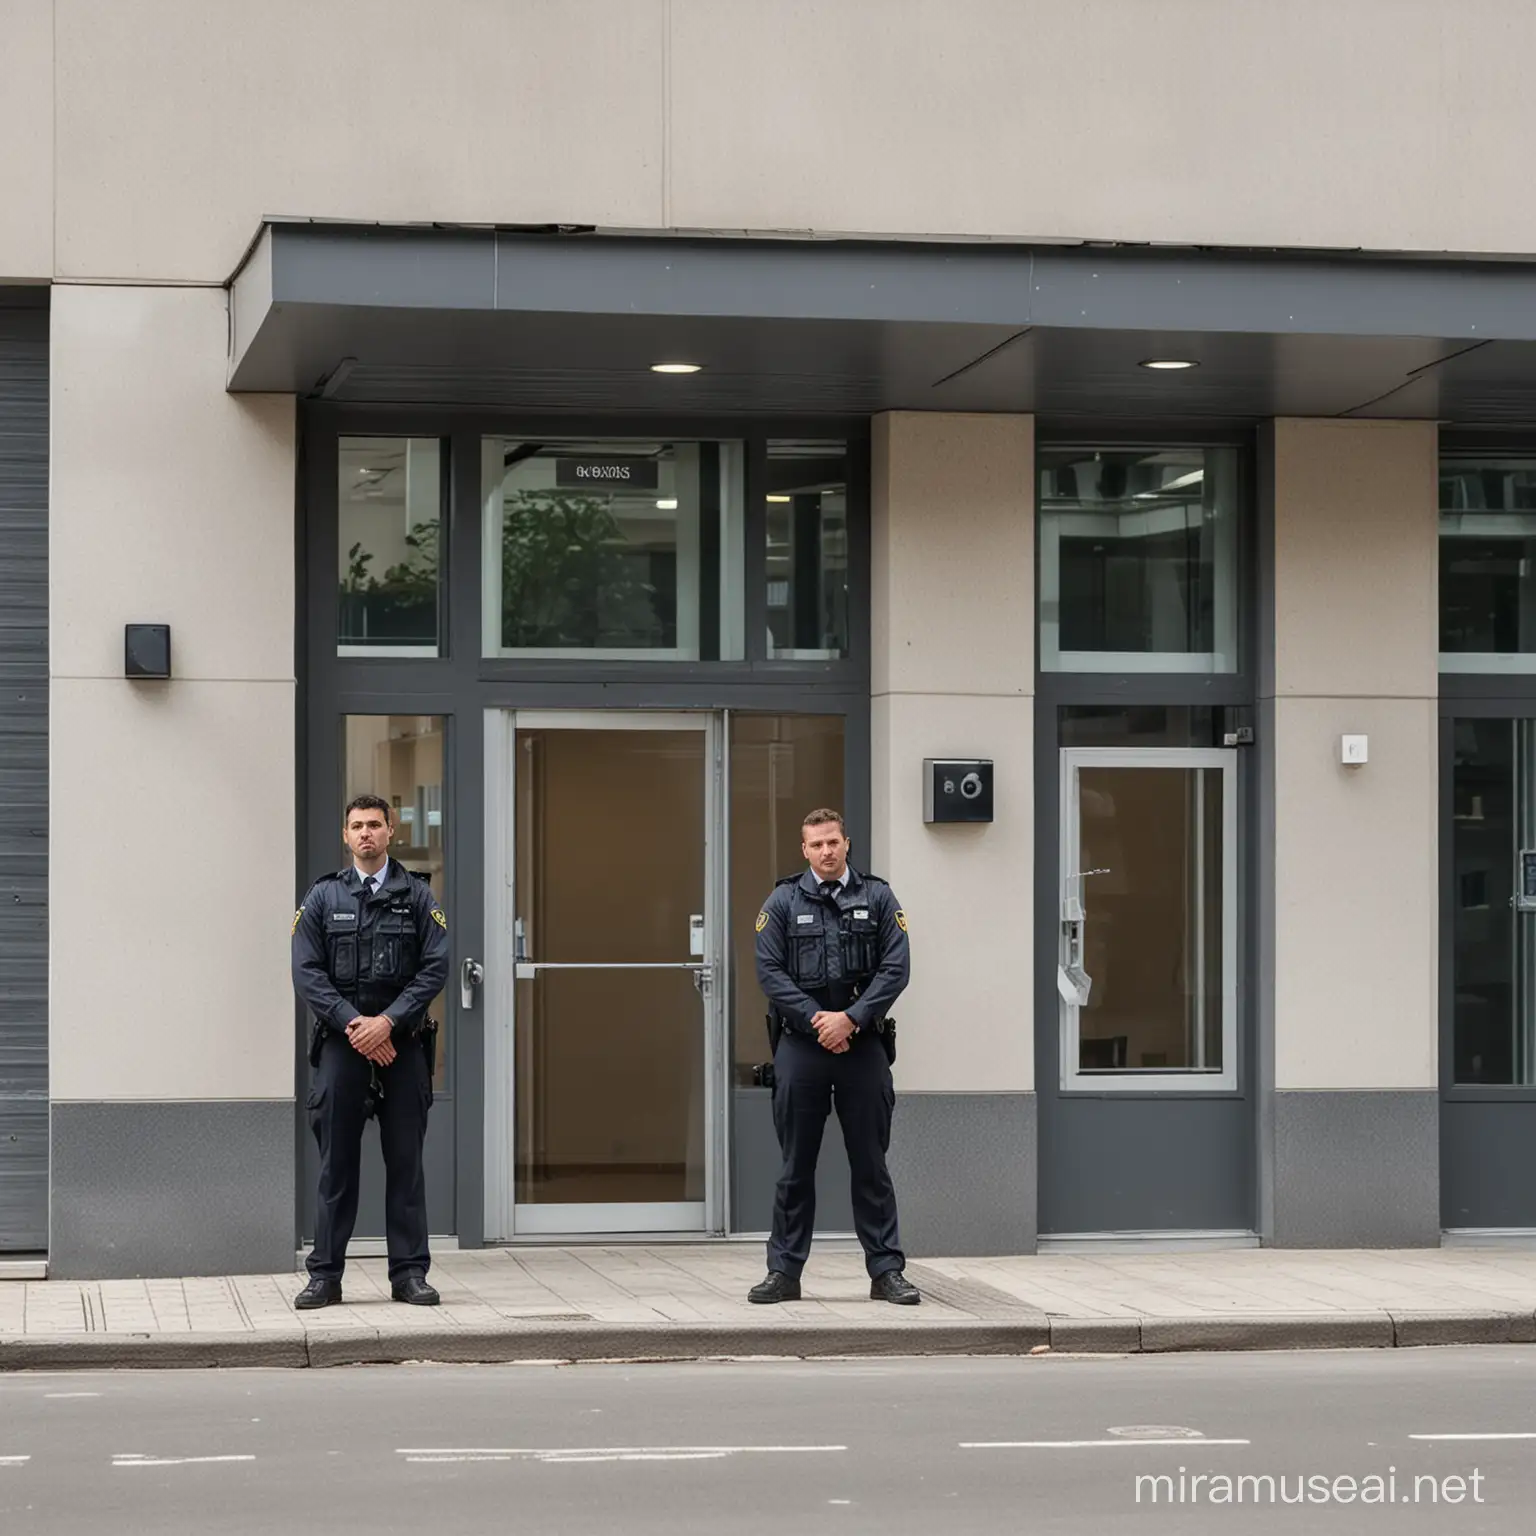 Secure Small Office Building with Exterior Security Guards